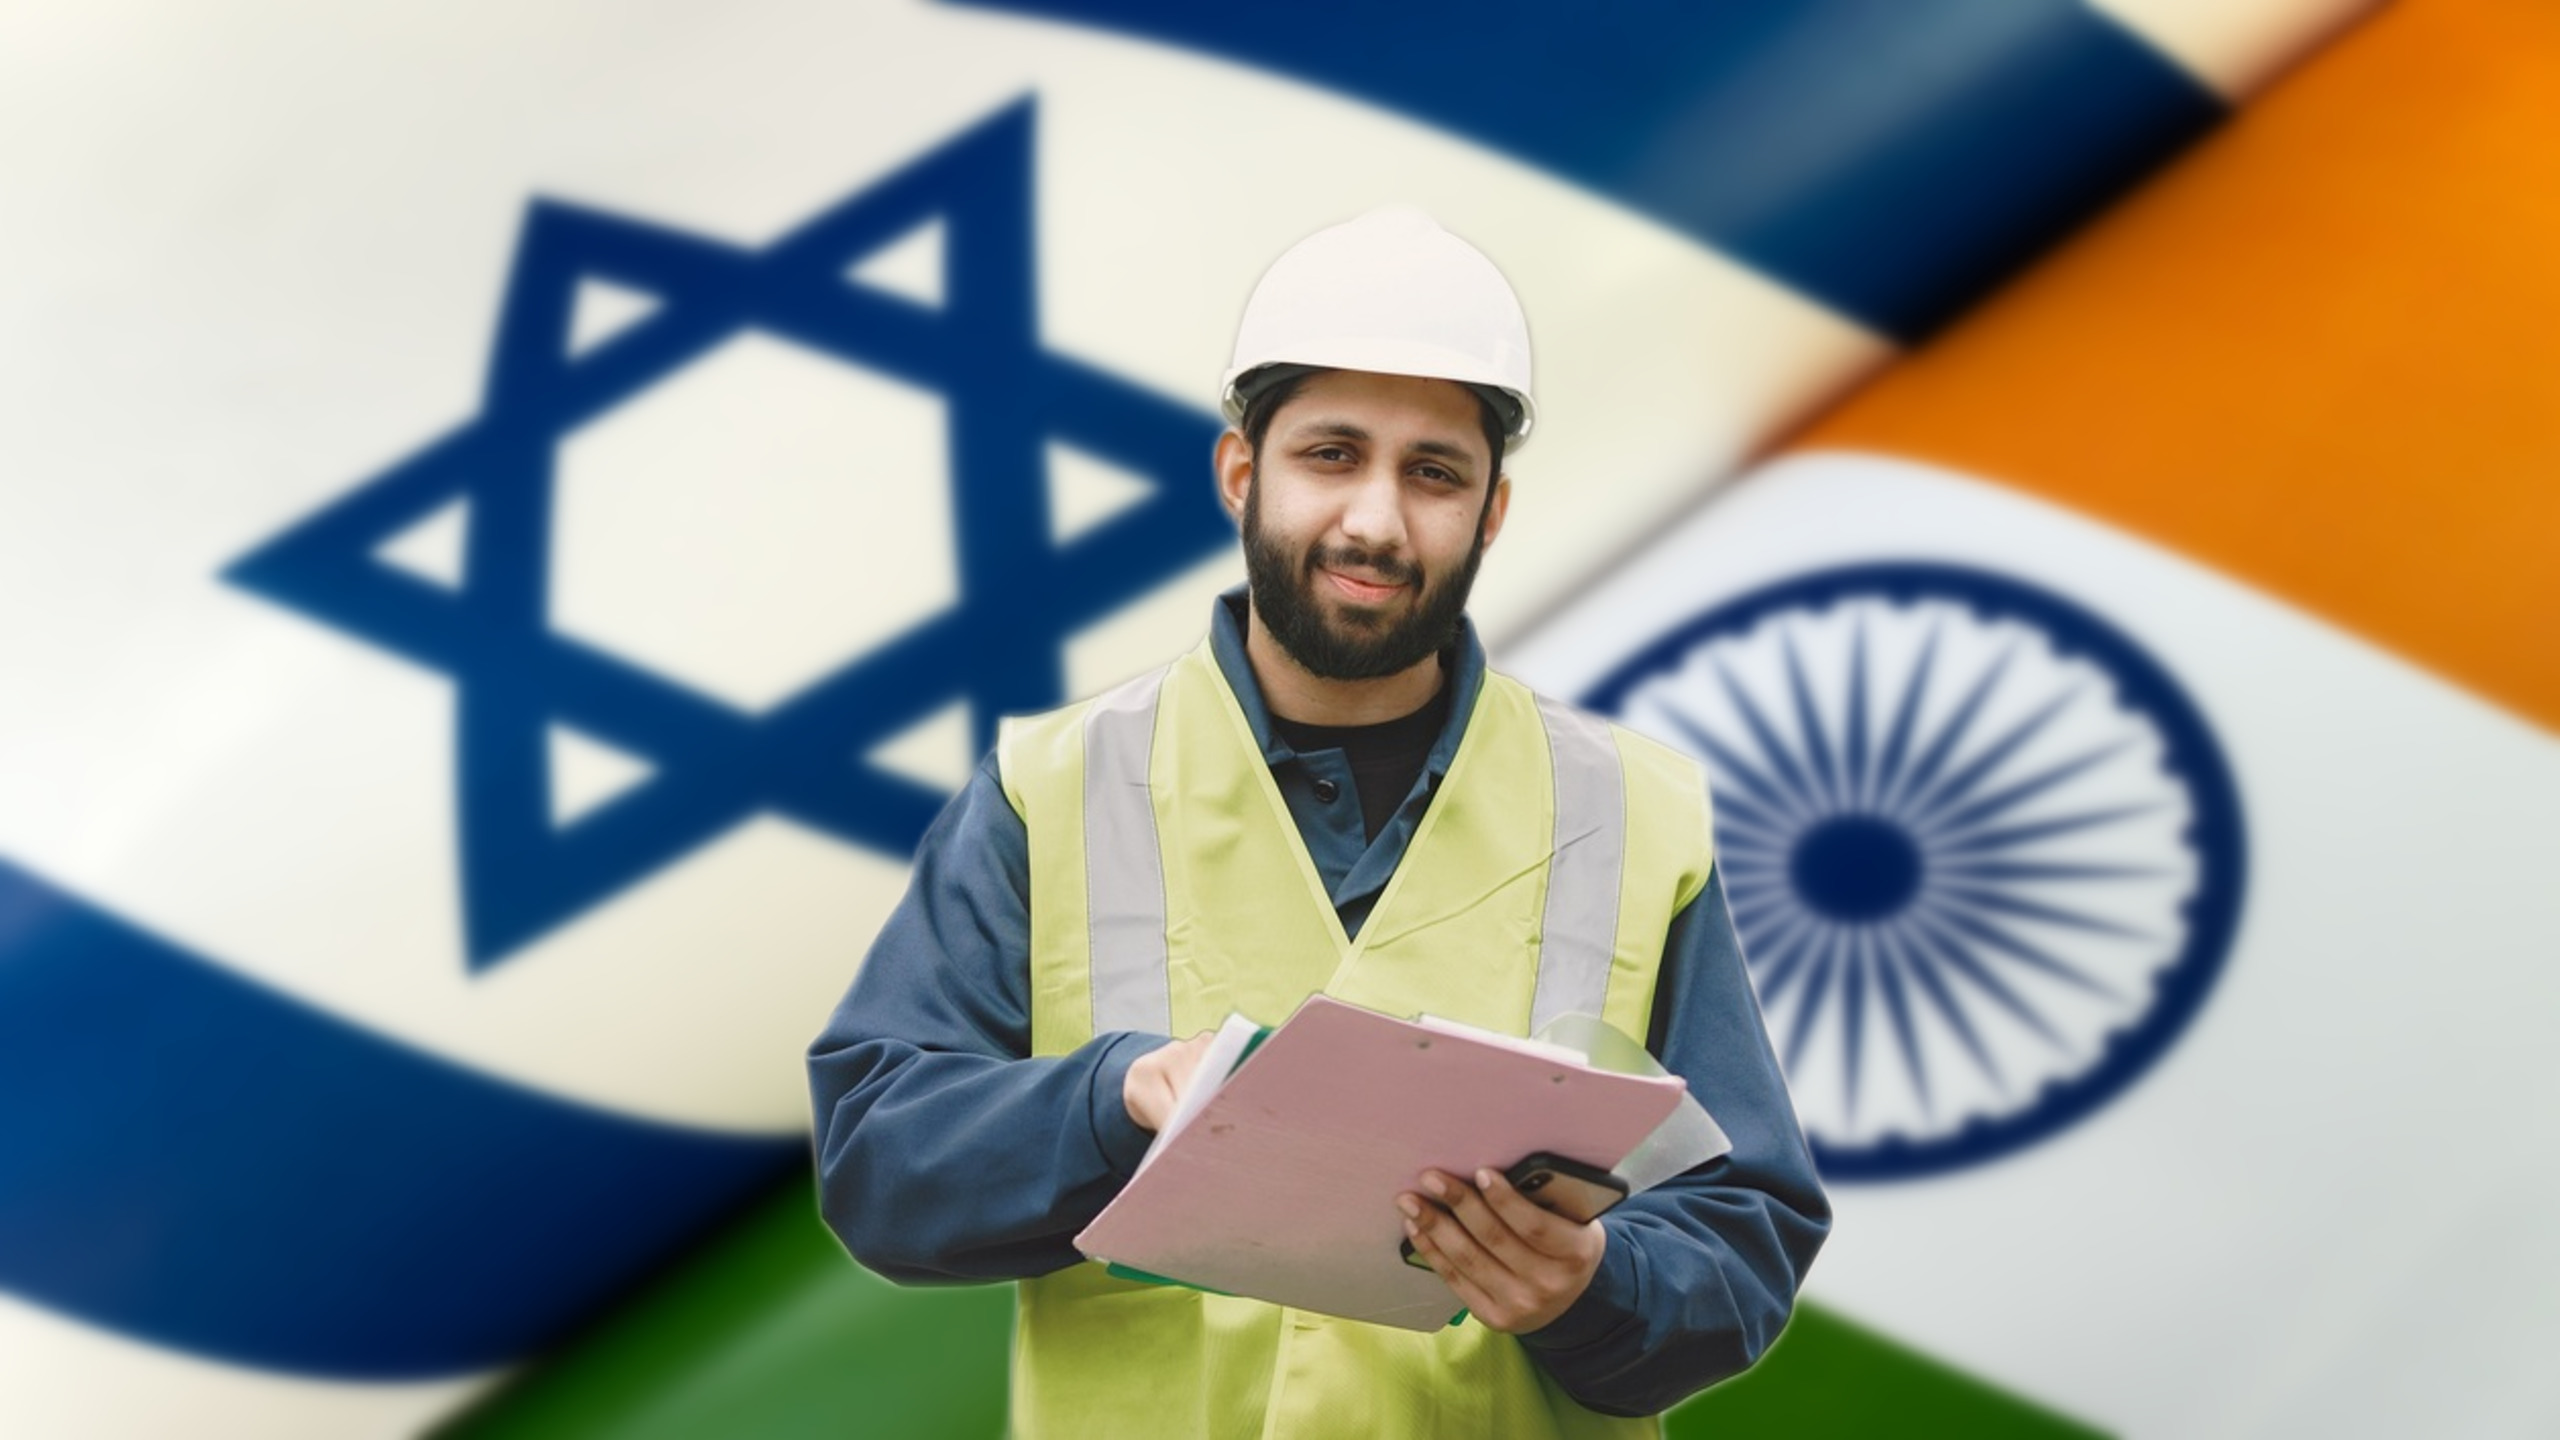 Indian Workers Set To Bolster Israeli Economy as Strategic Partnership Grows